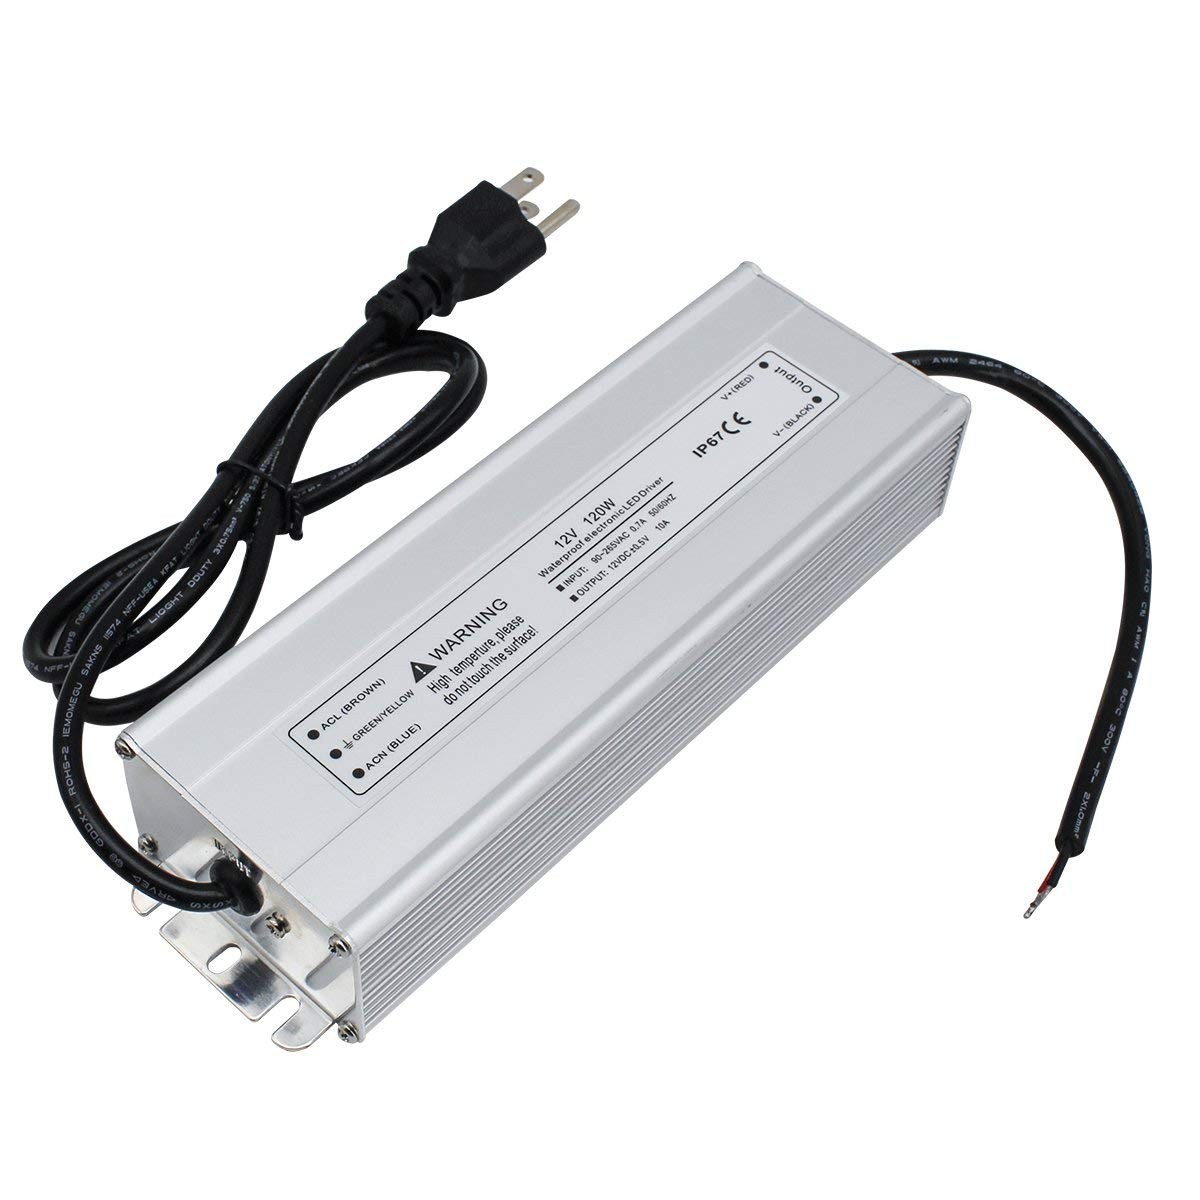 12V 10Amp 120W Outdoor IP67 Waterproof LED Power Supply with Power Plug Aluminum Shell Transformer